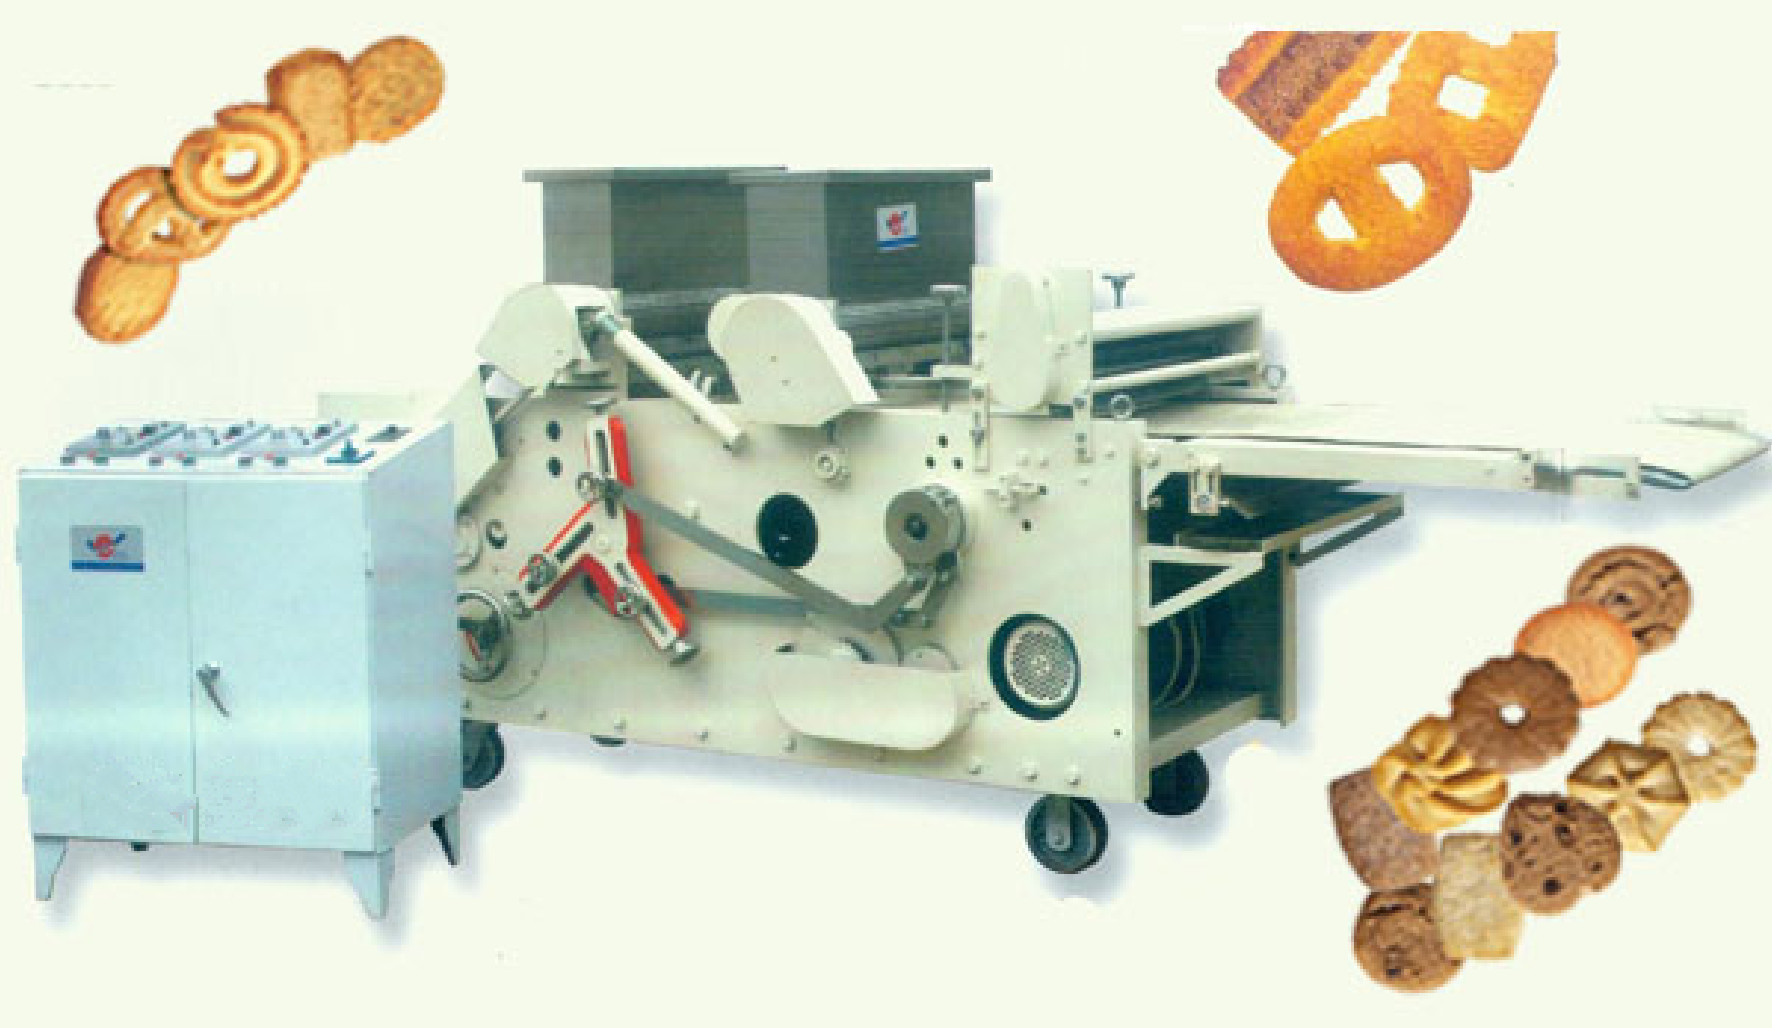 100 kg / H  – 250KG / H Biscuit / Cookie Production Line For Snack Food IOS9001 Certificated